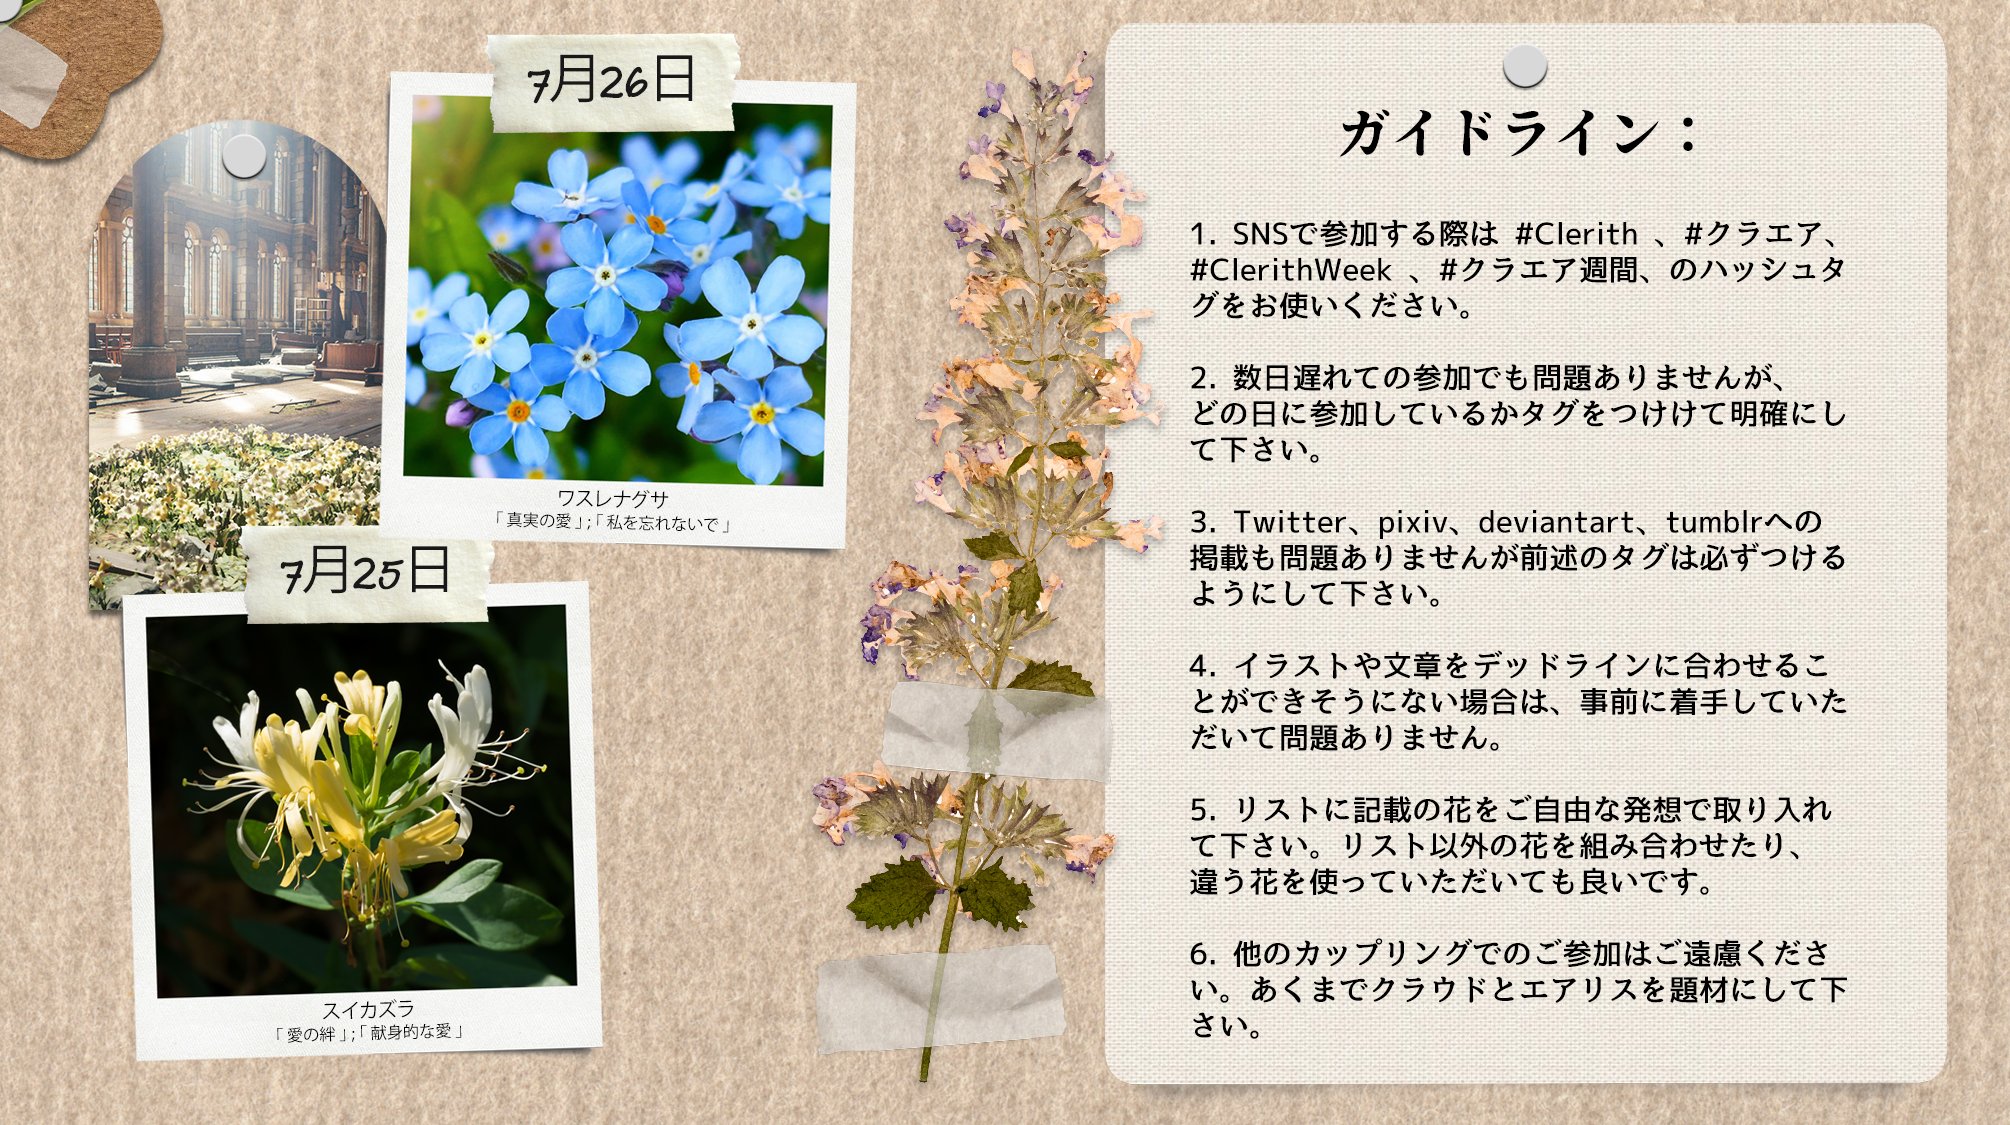 Clerithweek July th July 26th Hanakotoba The Language Of Flowers Clerith Week 21 Update Please Be Advised Of The New Dates For This Year S Clerithweek Which